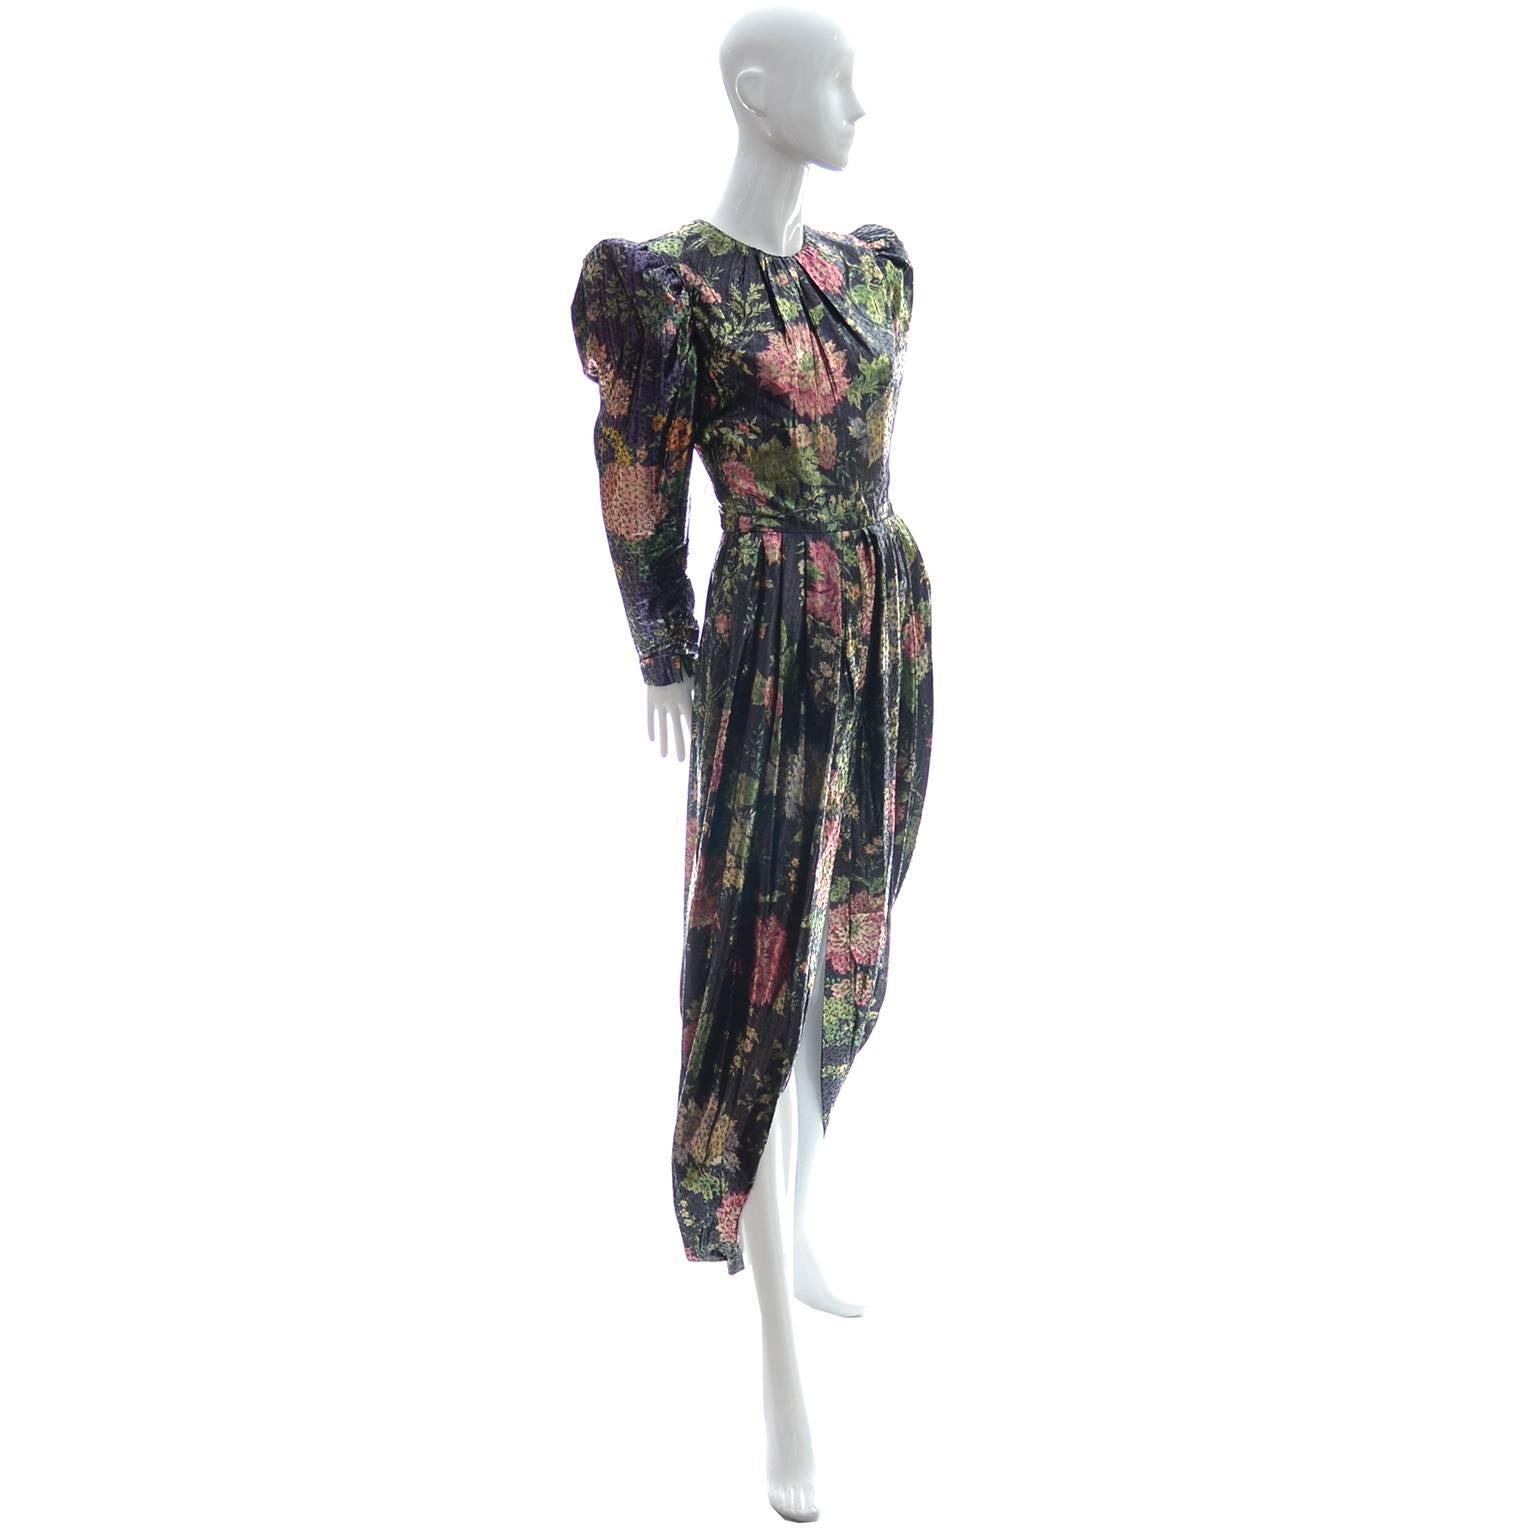 I love this striking vintage Arnold Scaasi floral metallic dress! The hem is ingeniously designed with a soft 